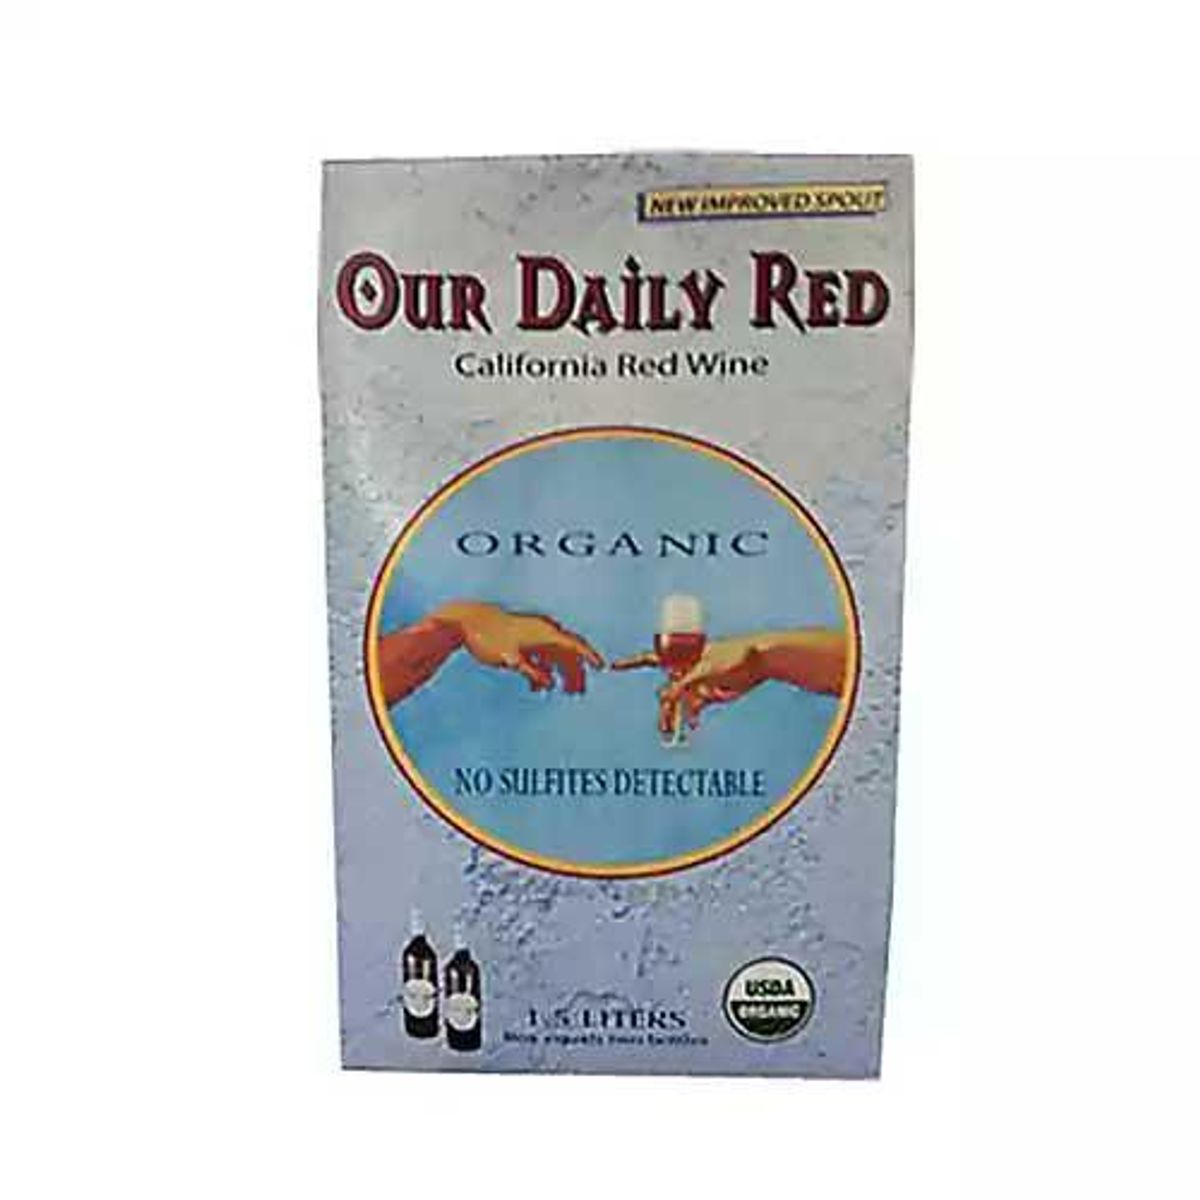 our daily red california red wine